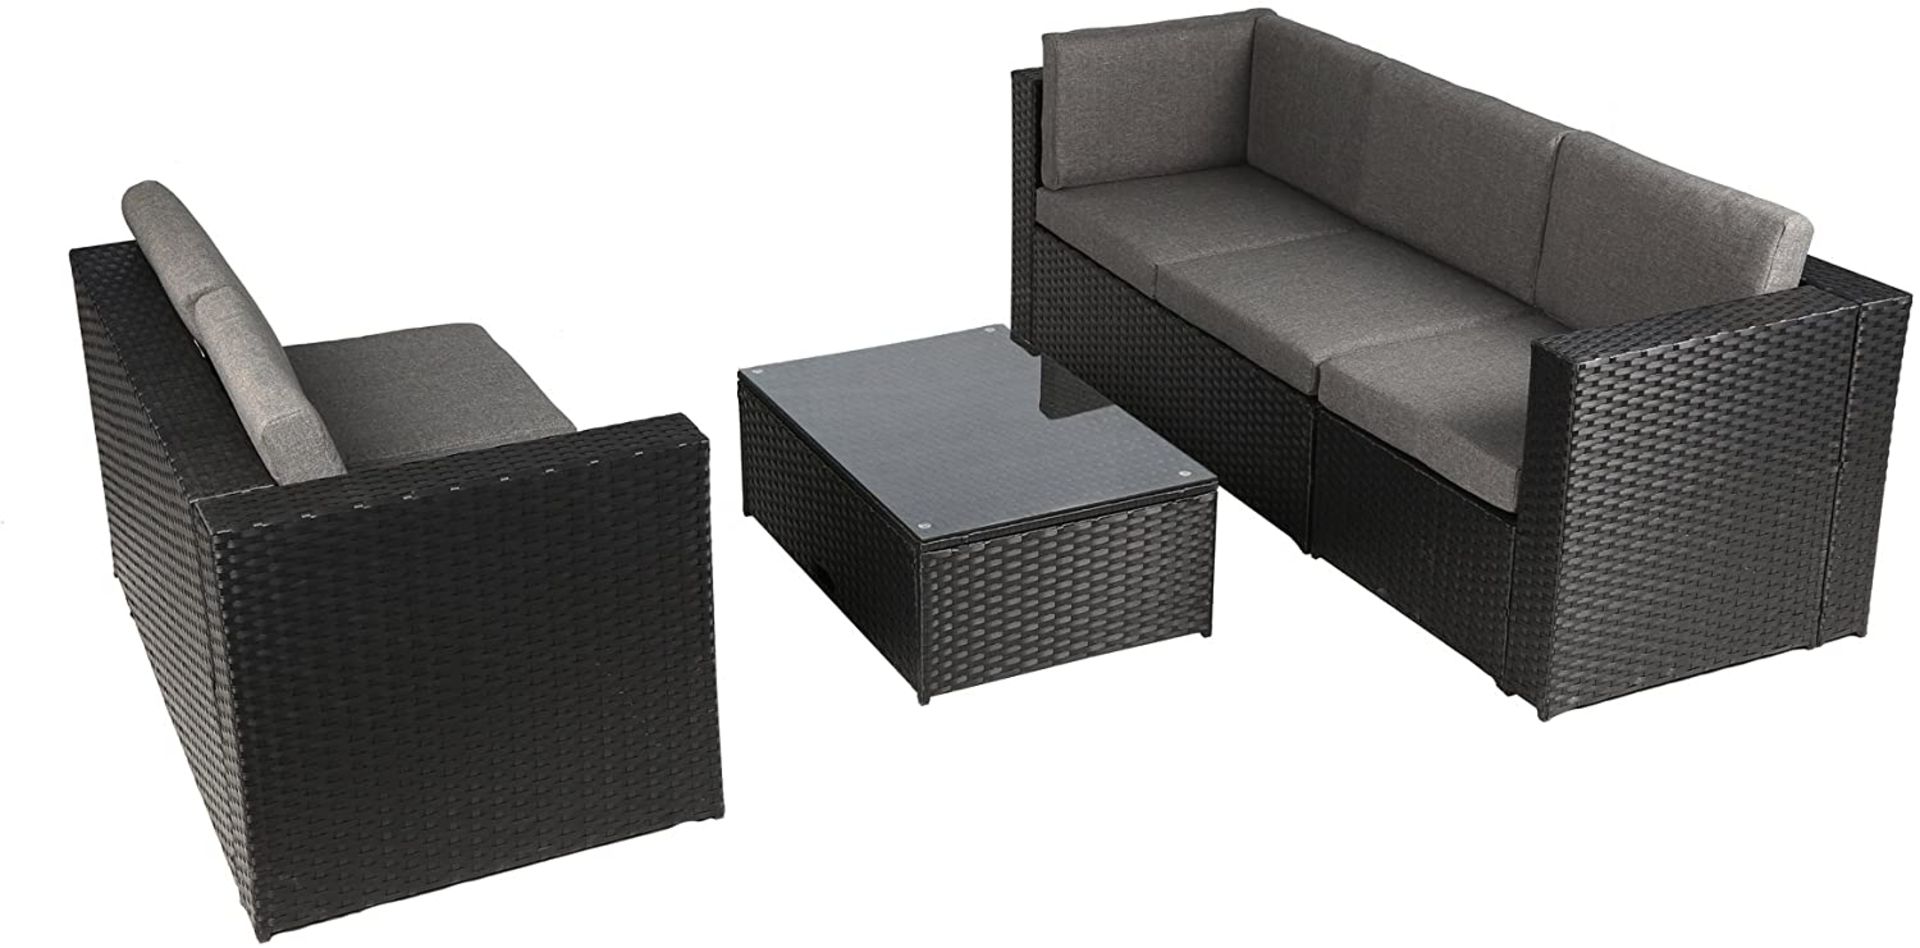 * 1 xBrand New - In Cardboard Boxes - Garden Rattan Furntiure Set. Black Wick with Grey Cushions. - Image 4 of 6